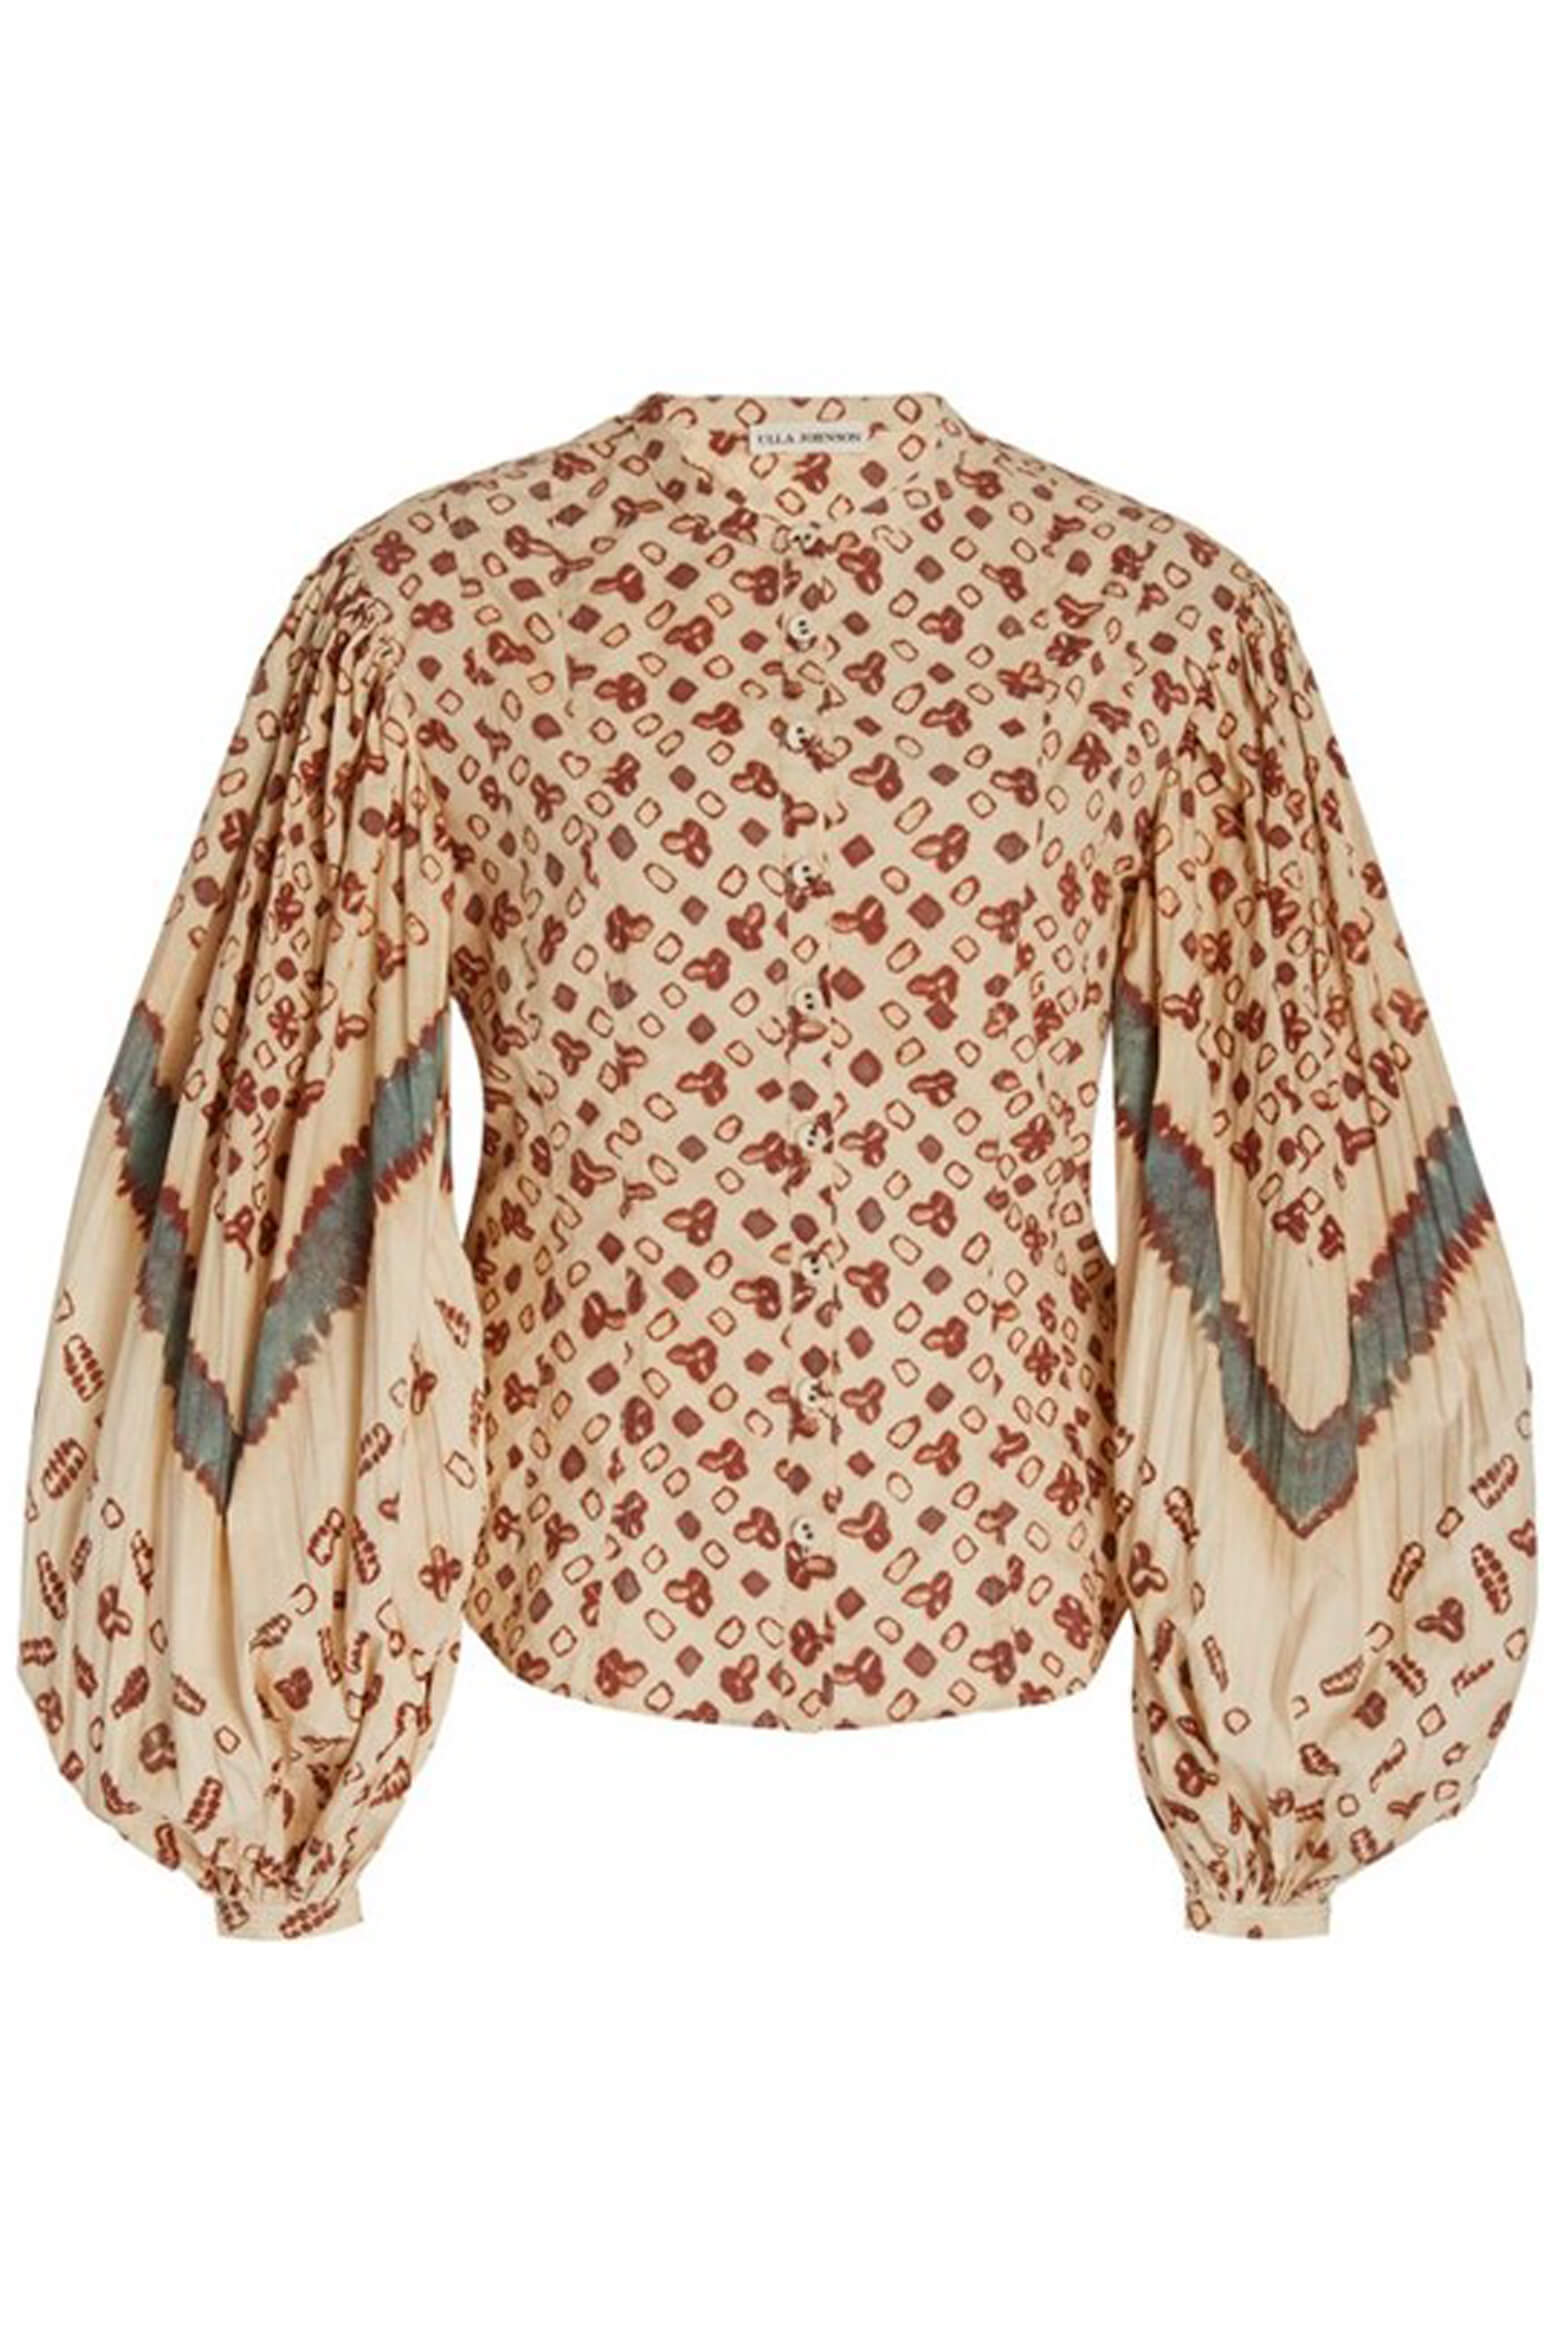 Ulla Johnson Rami Blouse in Opal from The New Trend